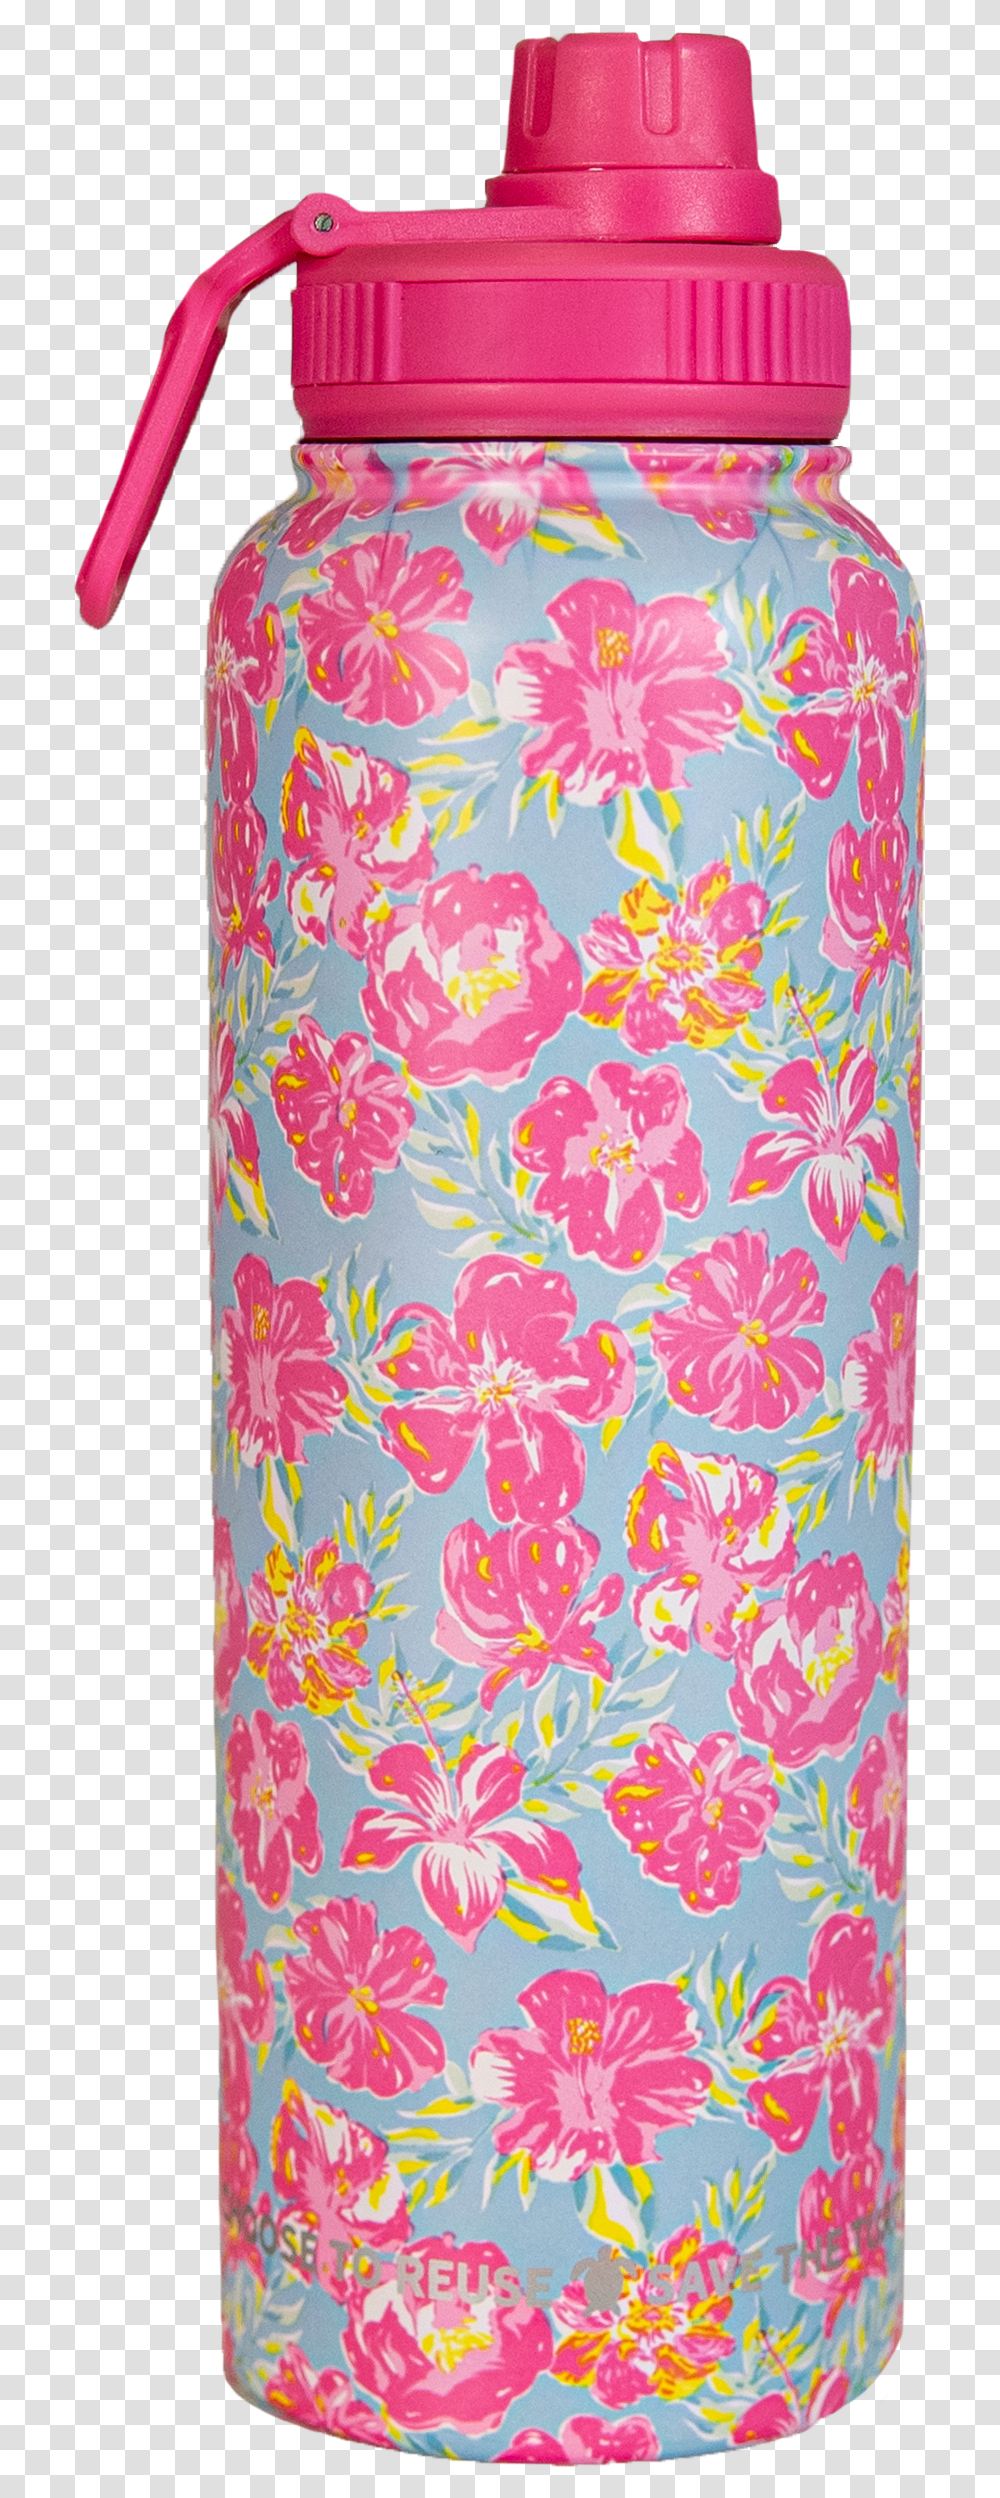 Simply Southern Water Bottle Hydro Water Bottle, Purse, Handbag, Accessories, Accessory Transparent Png